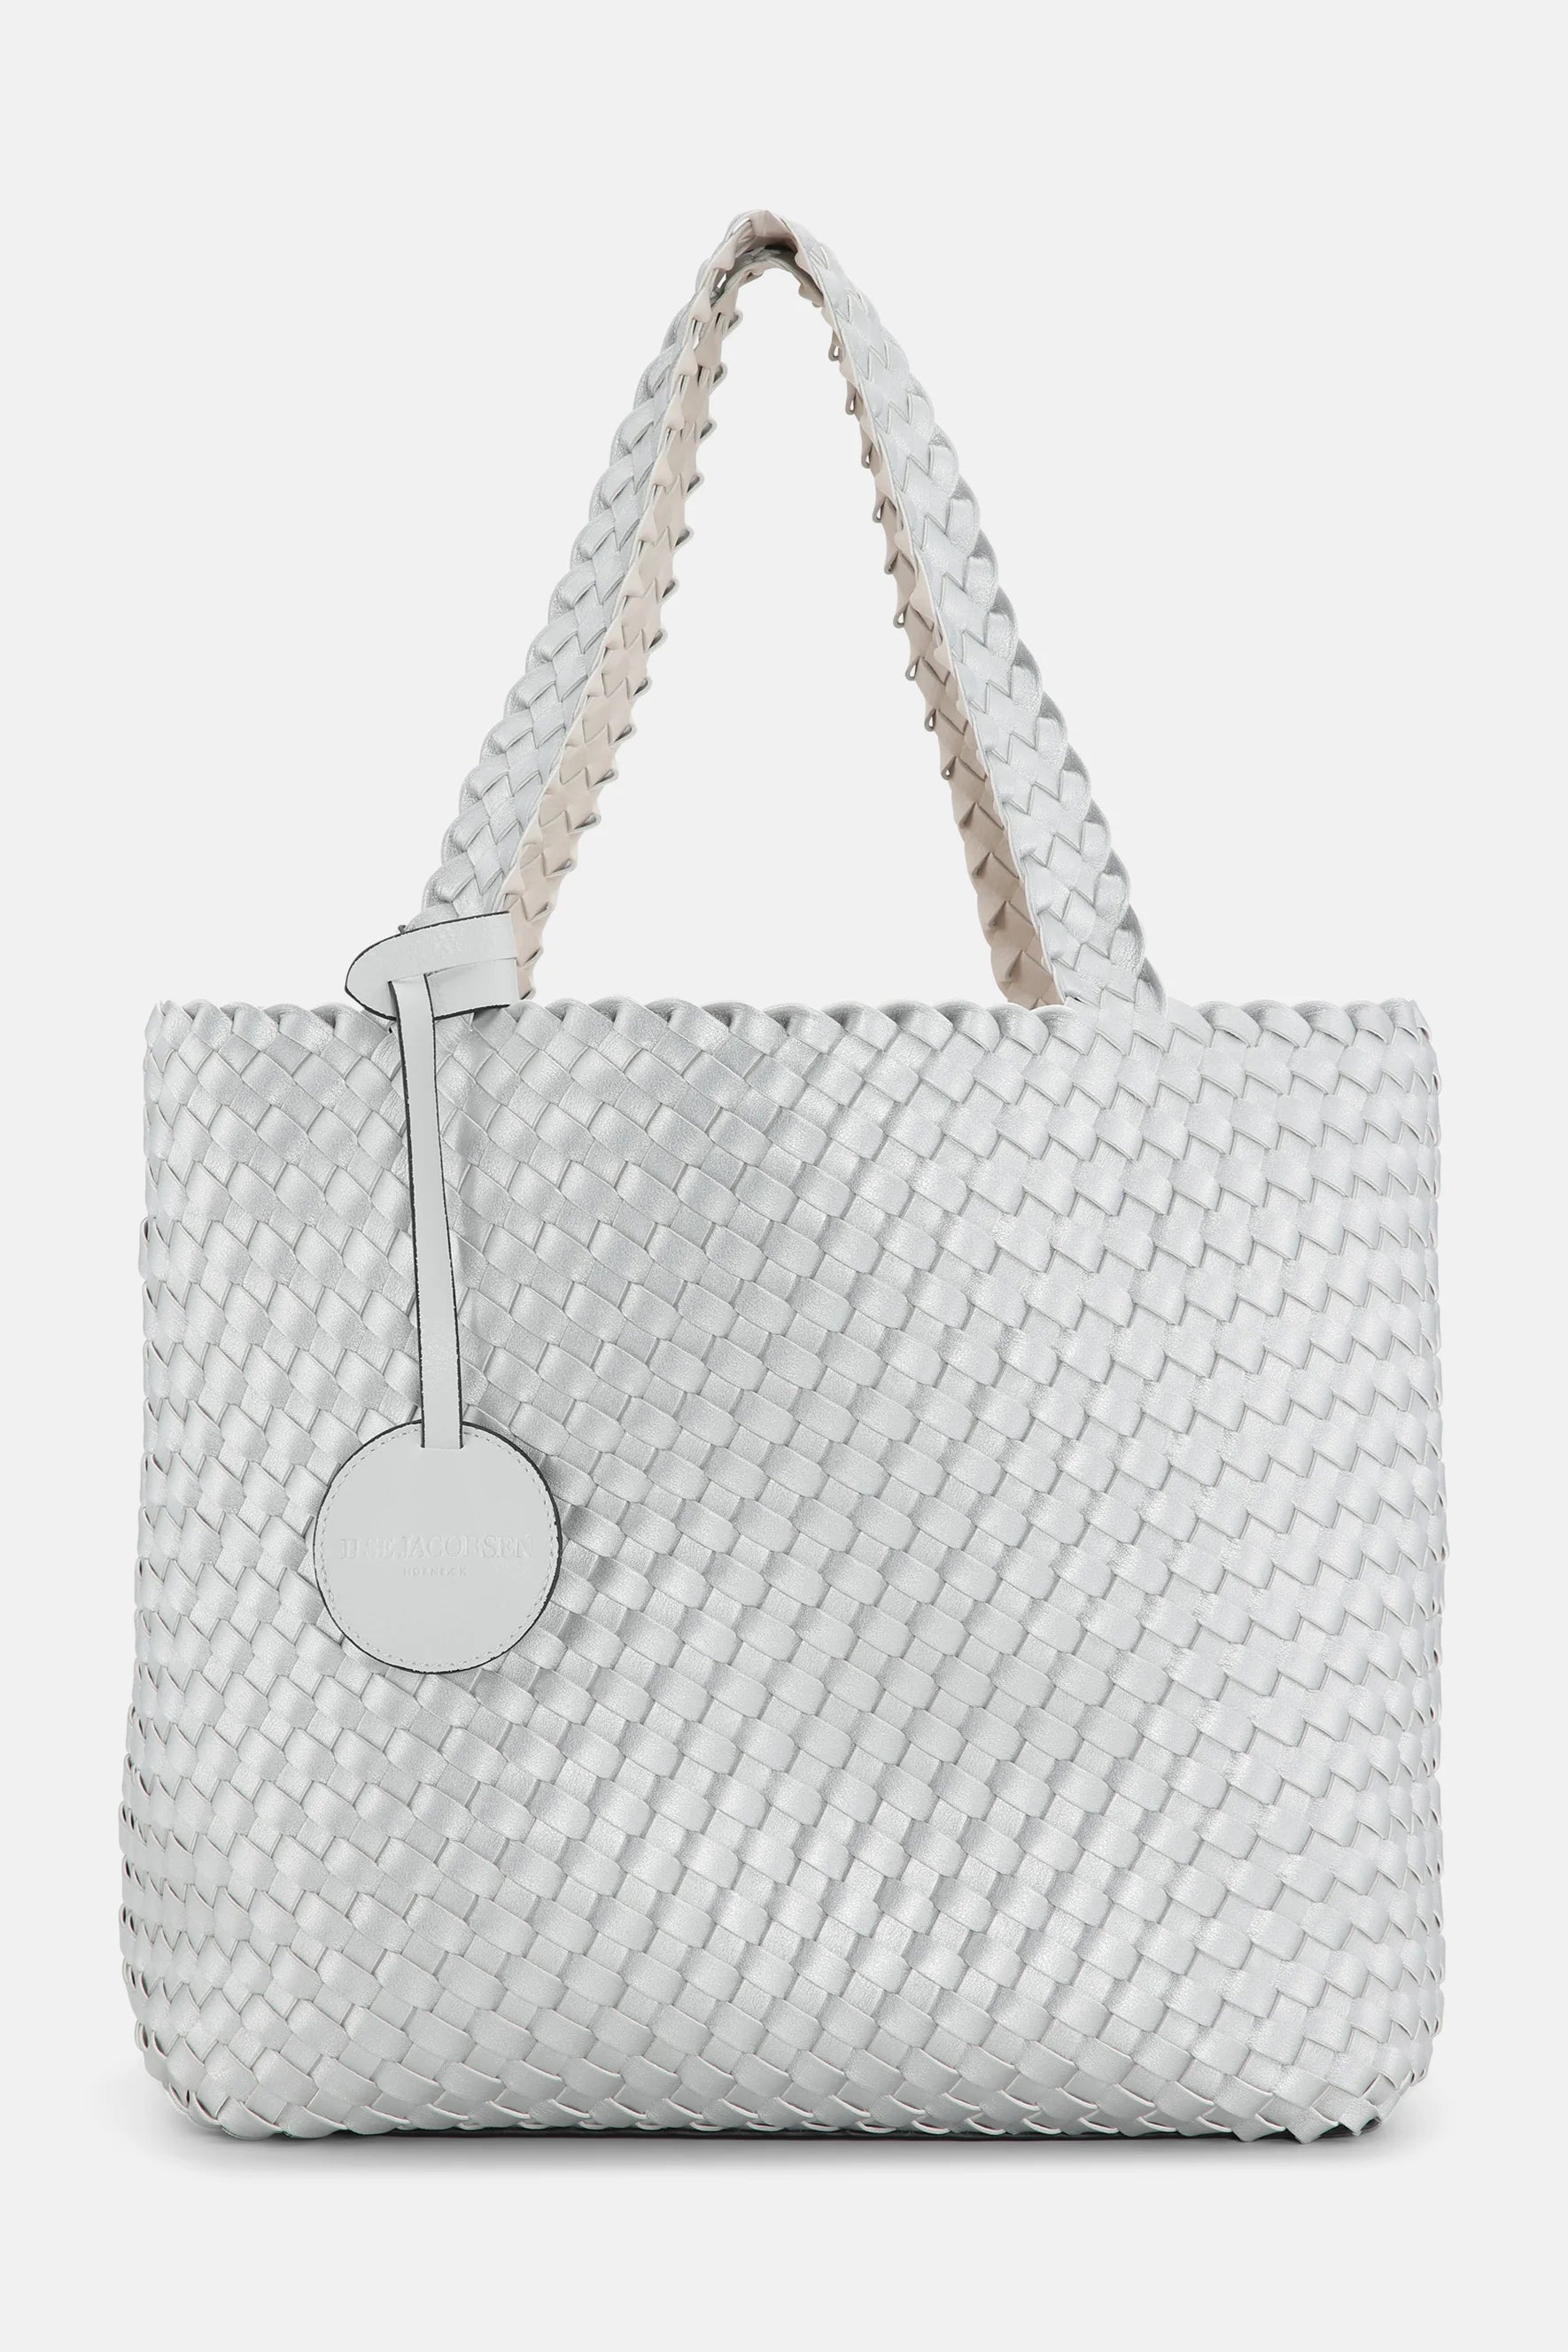 Tote Bag by Ilse Jacobsen